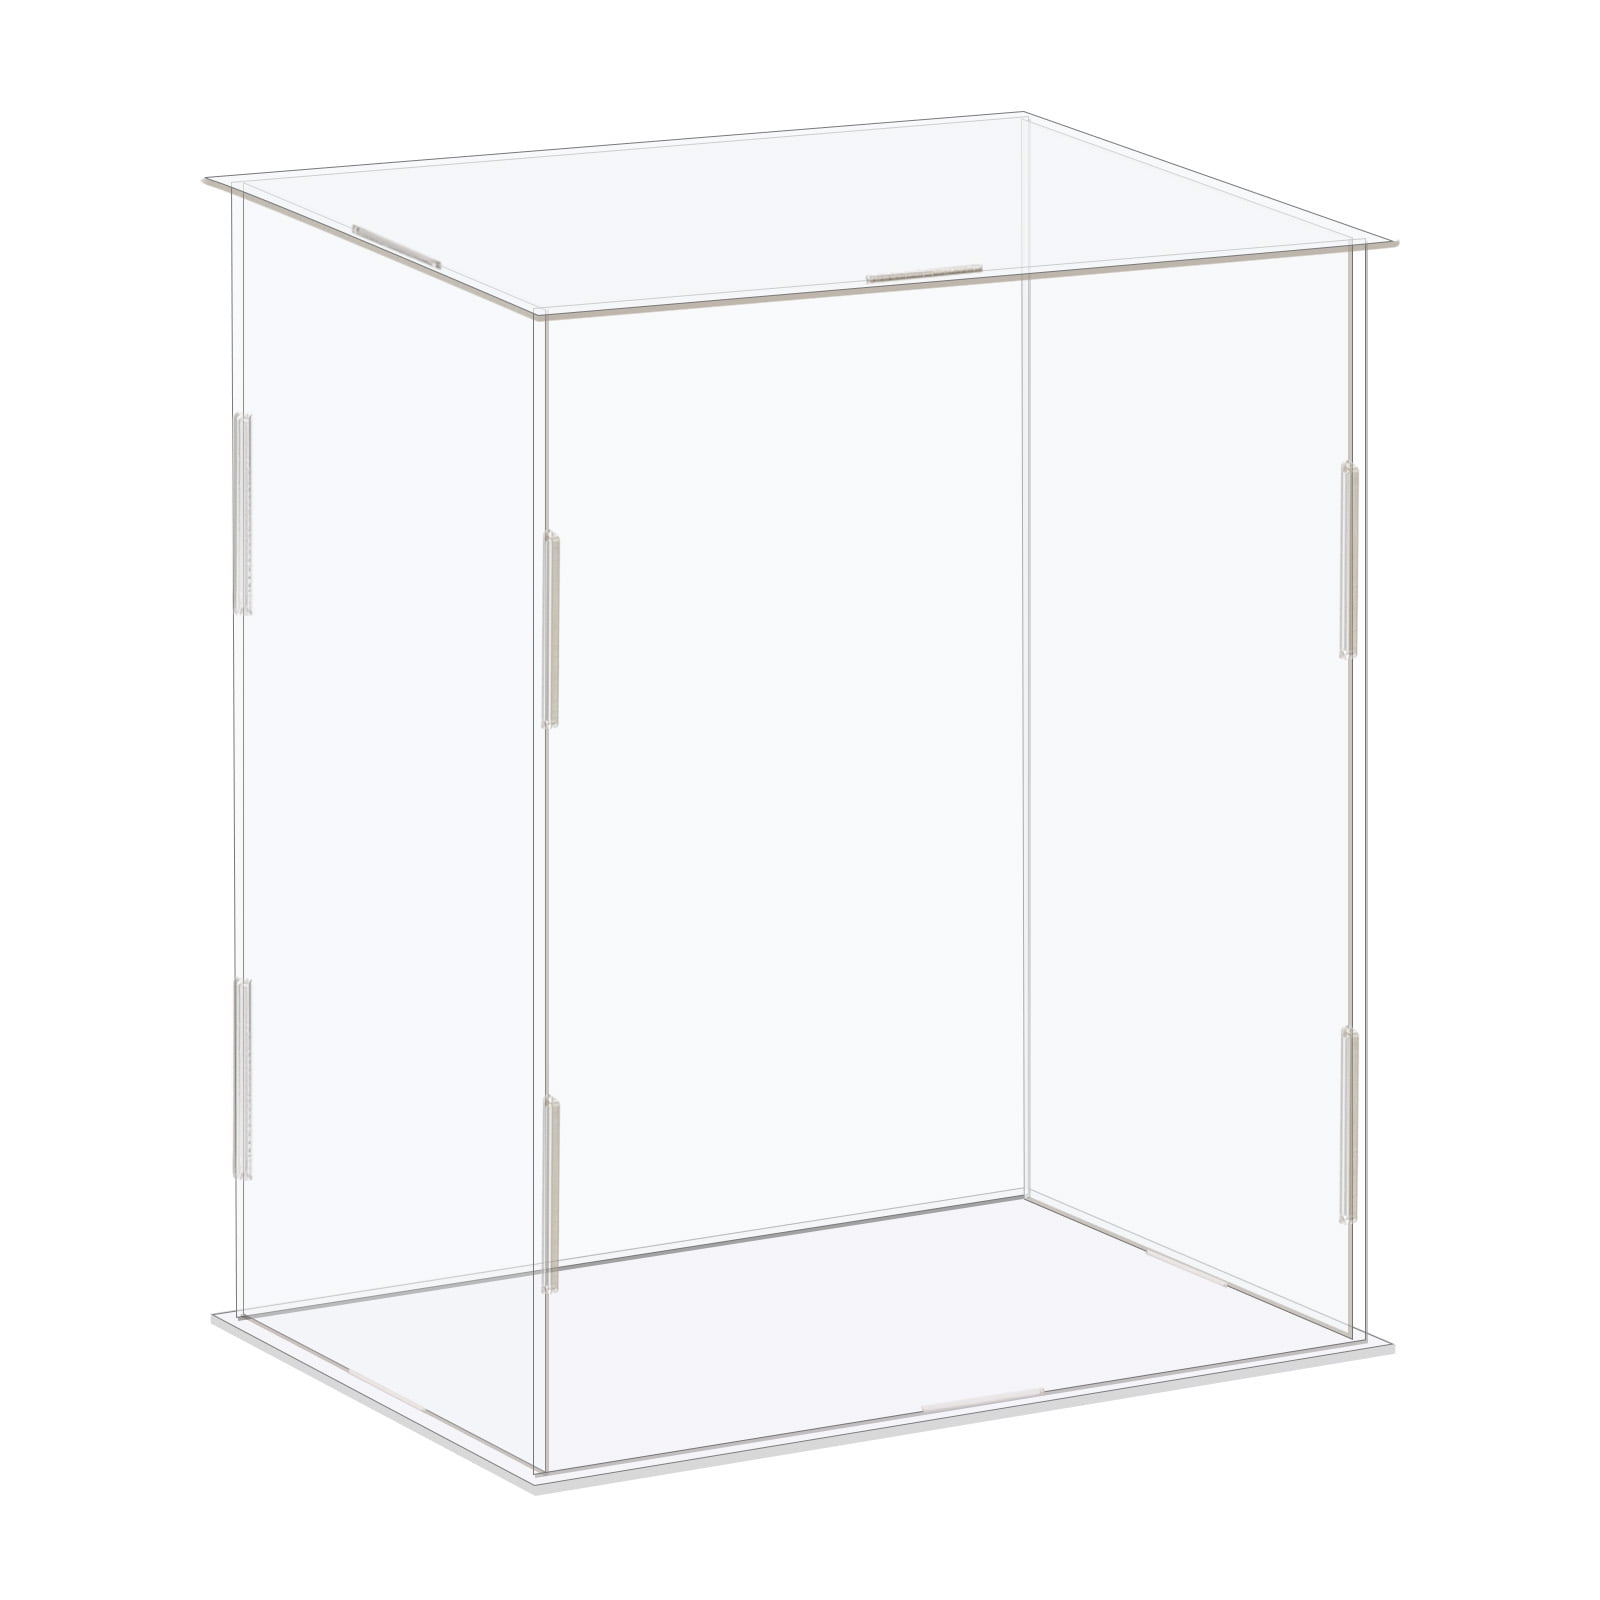 Uxcell Display Case Box Acrylic Box Transparent Dustproof Protection Showcase 41x31x36cm for Collectibles, Size: 41x31x36cm/16.1x12.2x14.1 inch, Blue